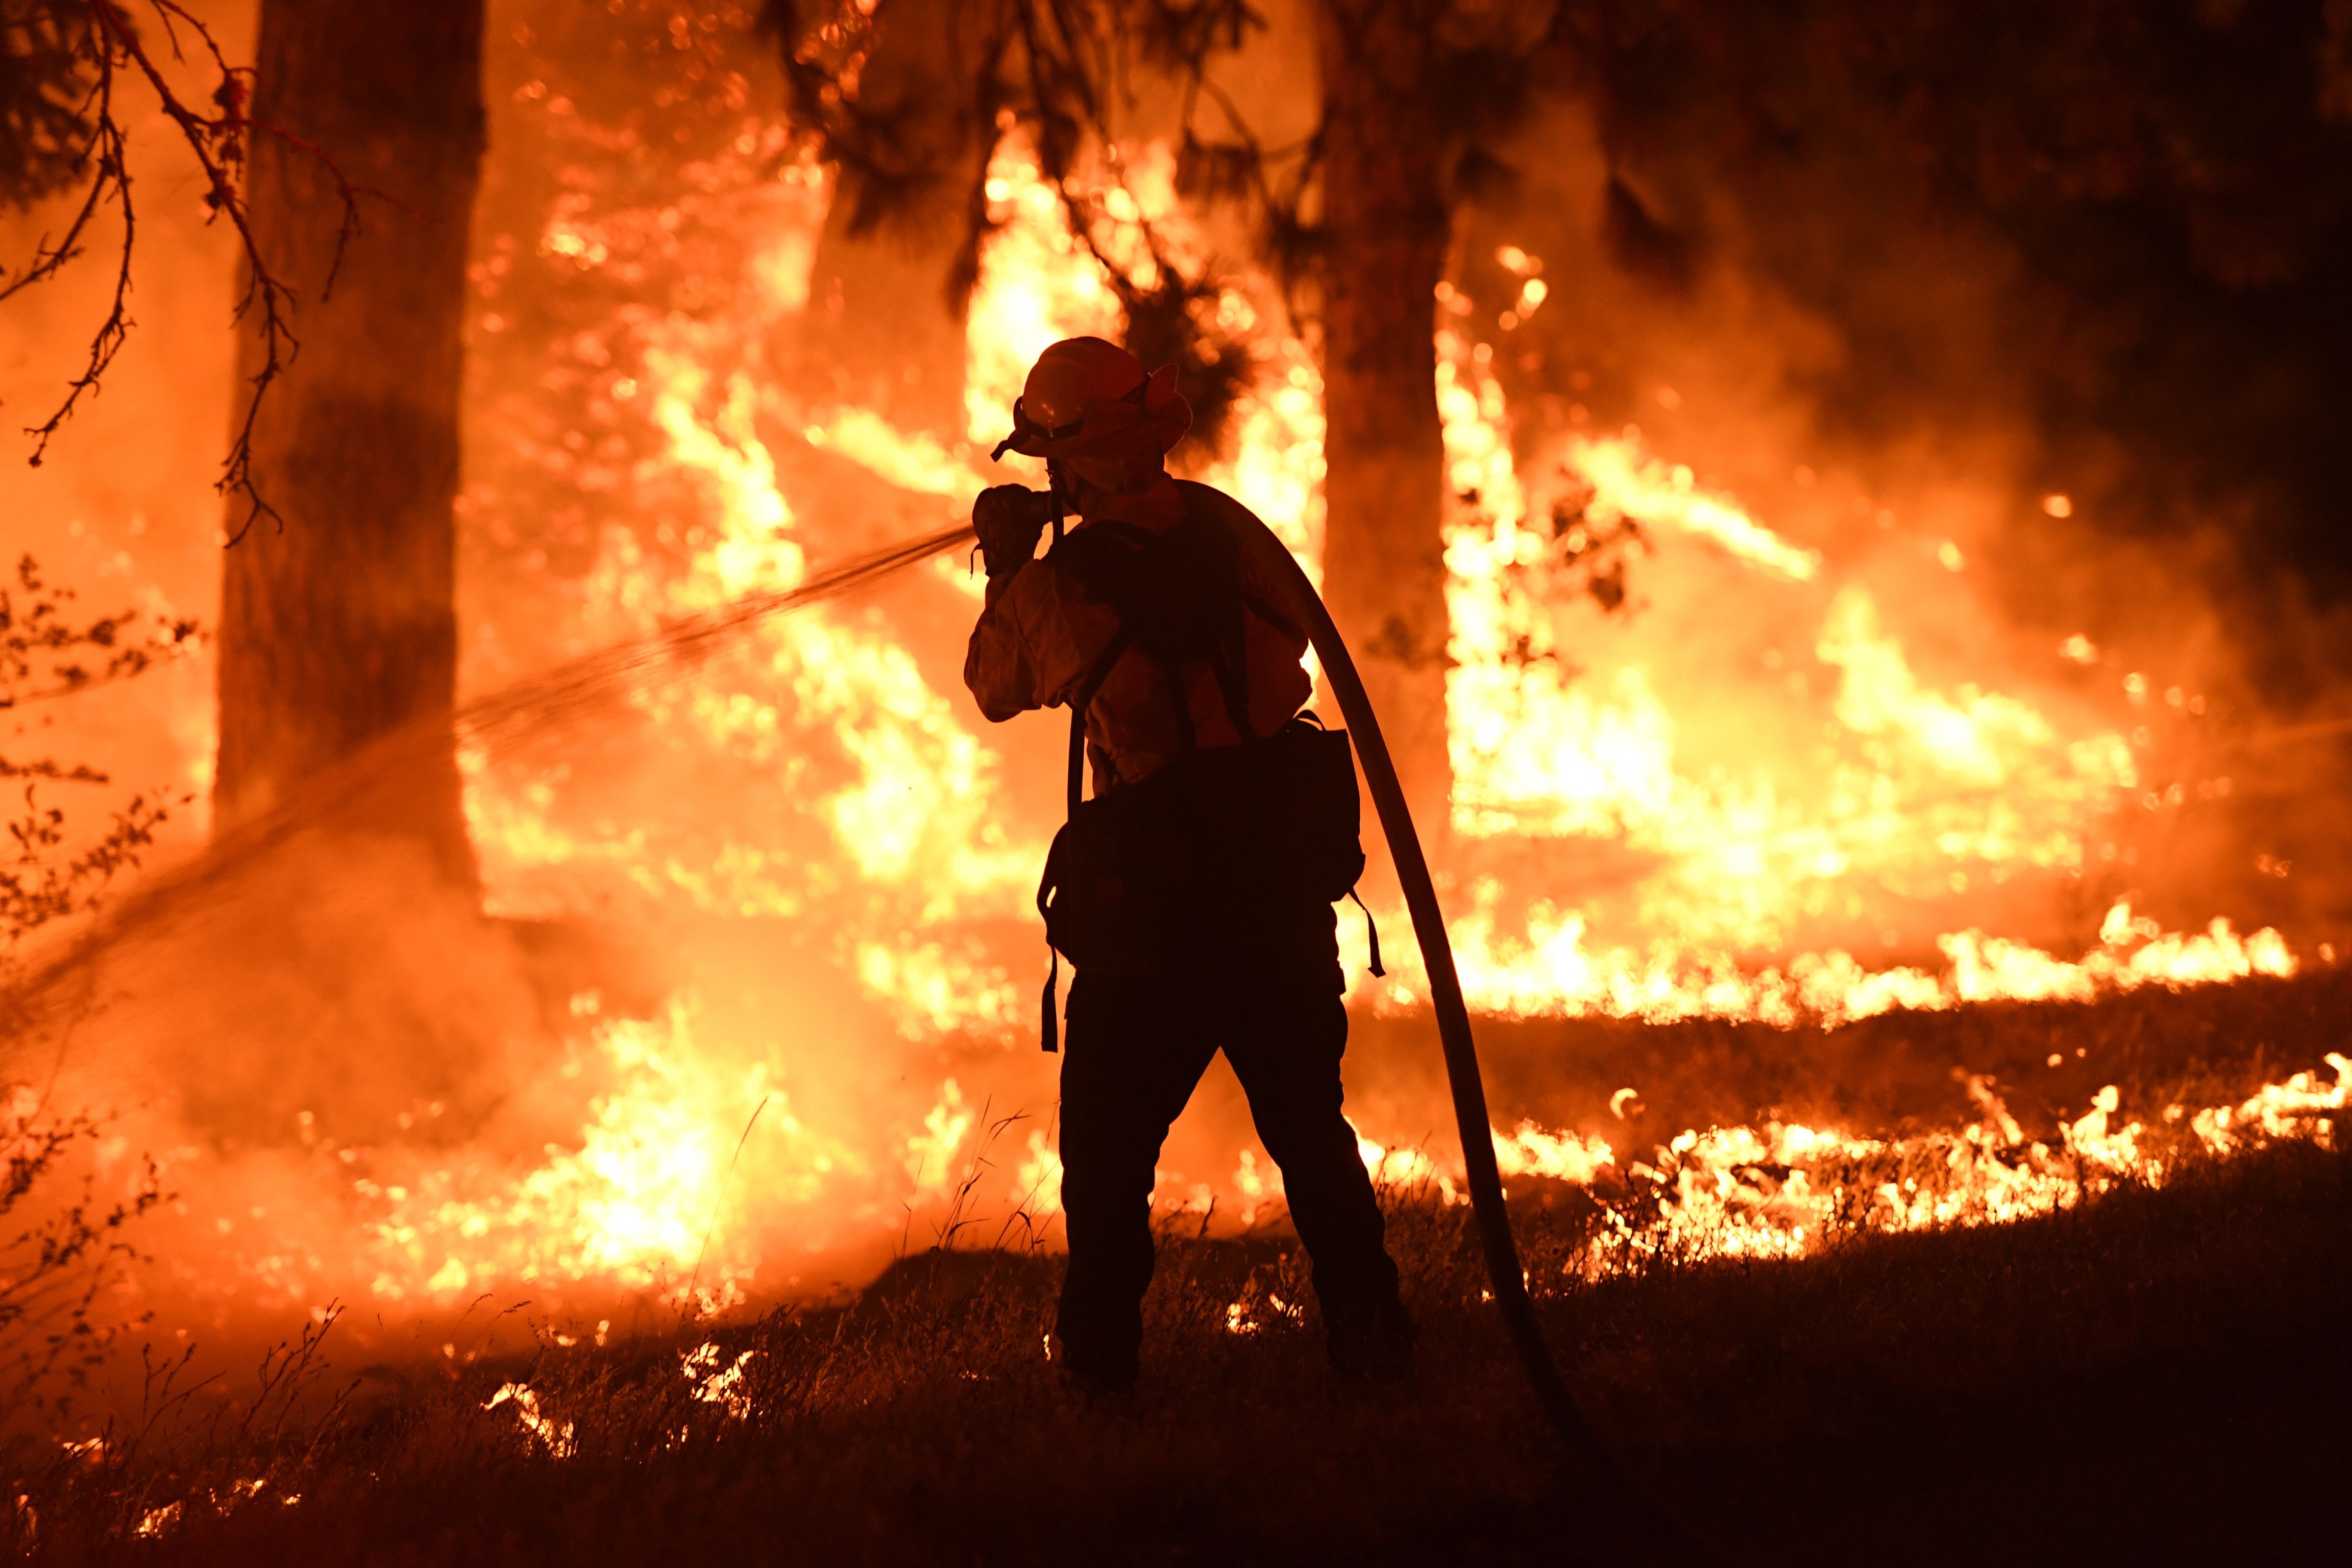 JULY 31 - A firefighter tries to control a back burn as the Carr fire continues to spread towards the towns of Douglas City and Lewiston near Redding, California (MARK RALSTON&mdash;AFP/Getty Images)